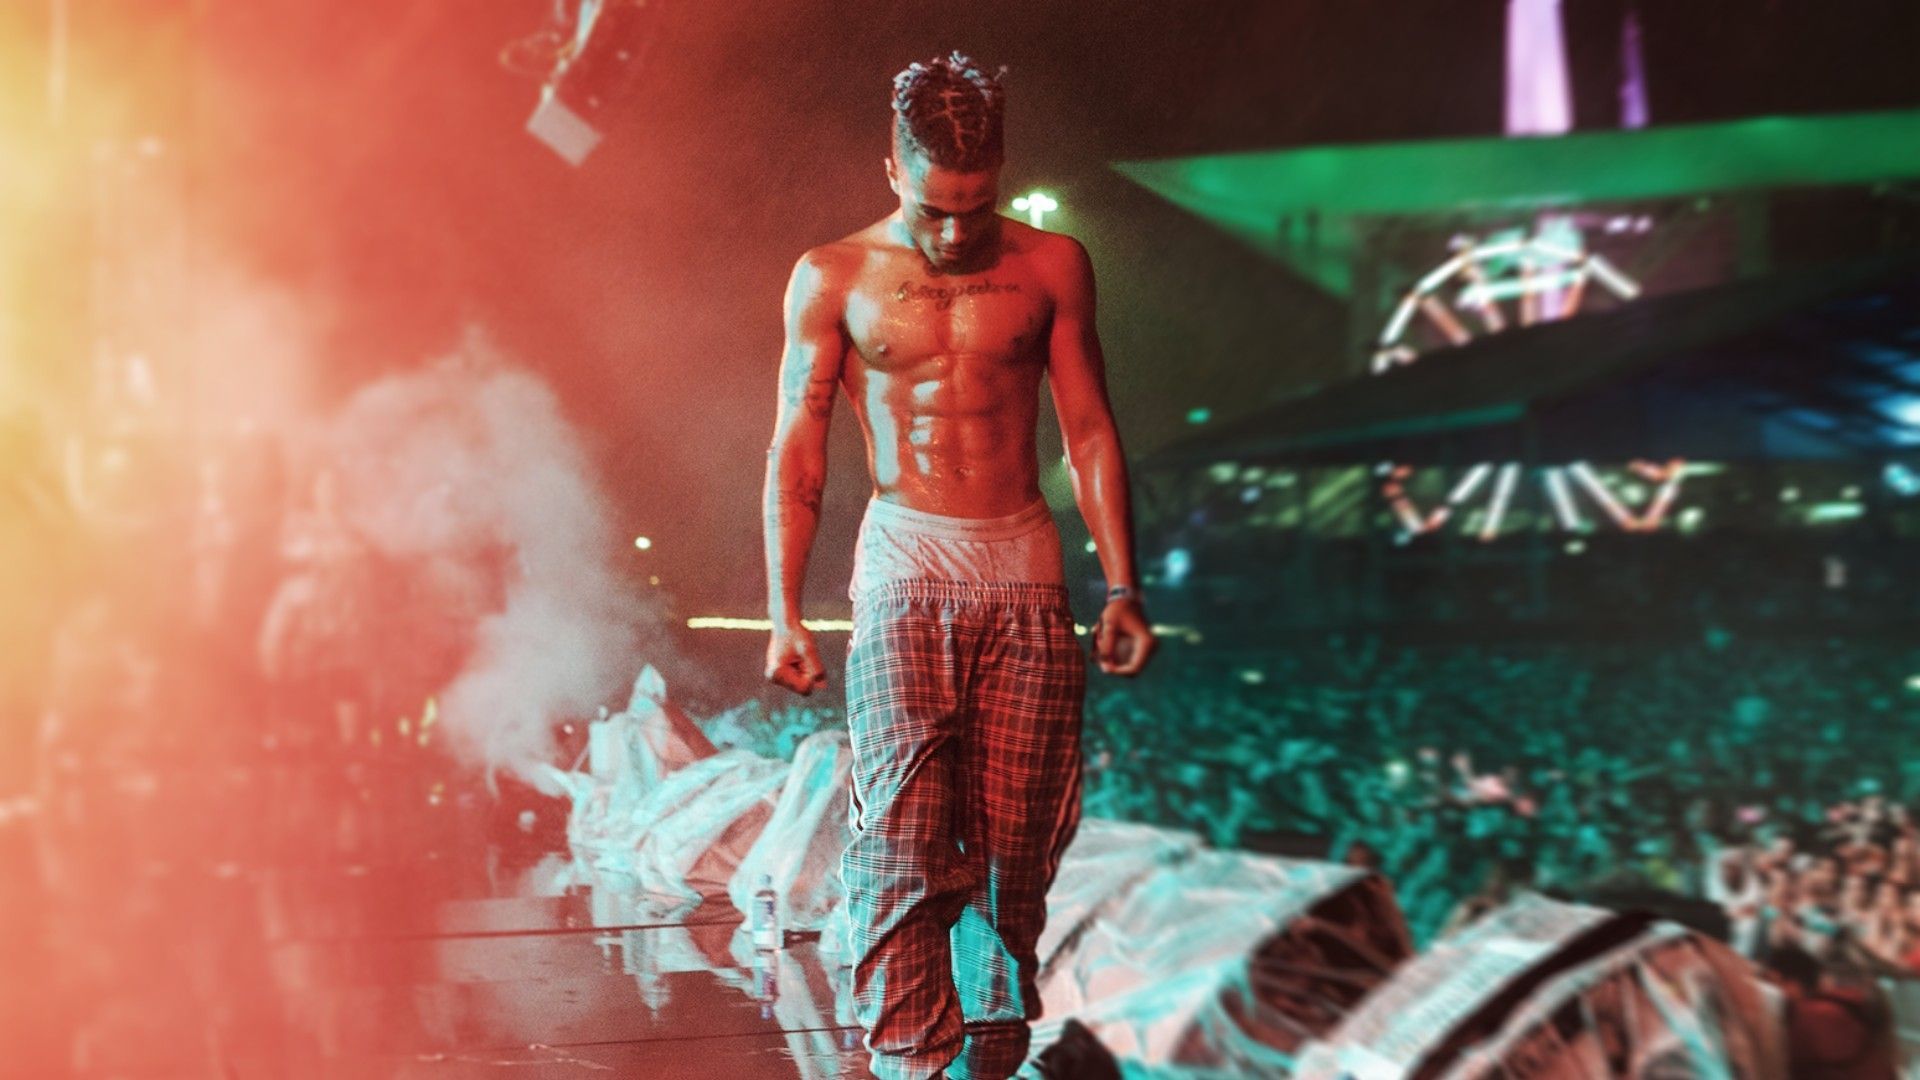 A man standing on stage with no shirt - XXXTentacion